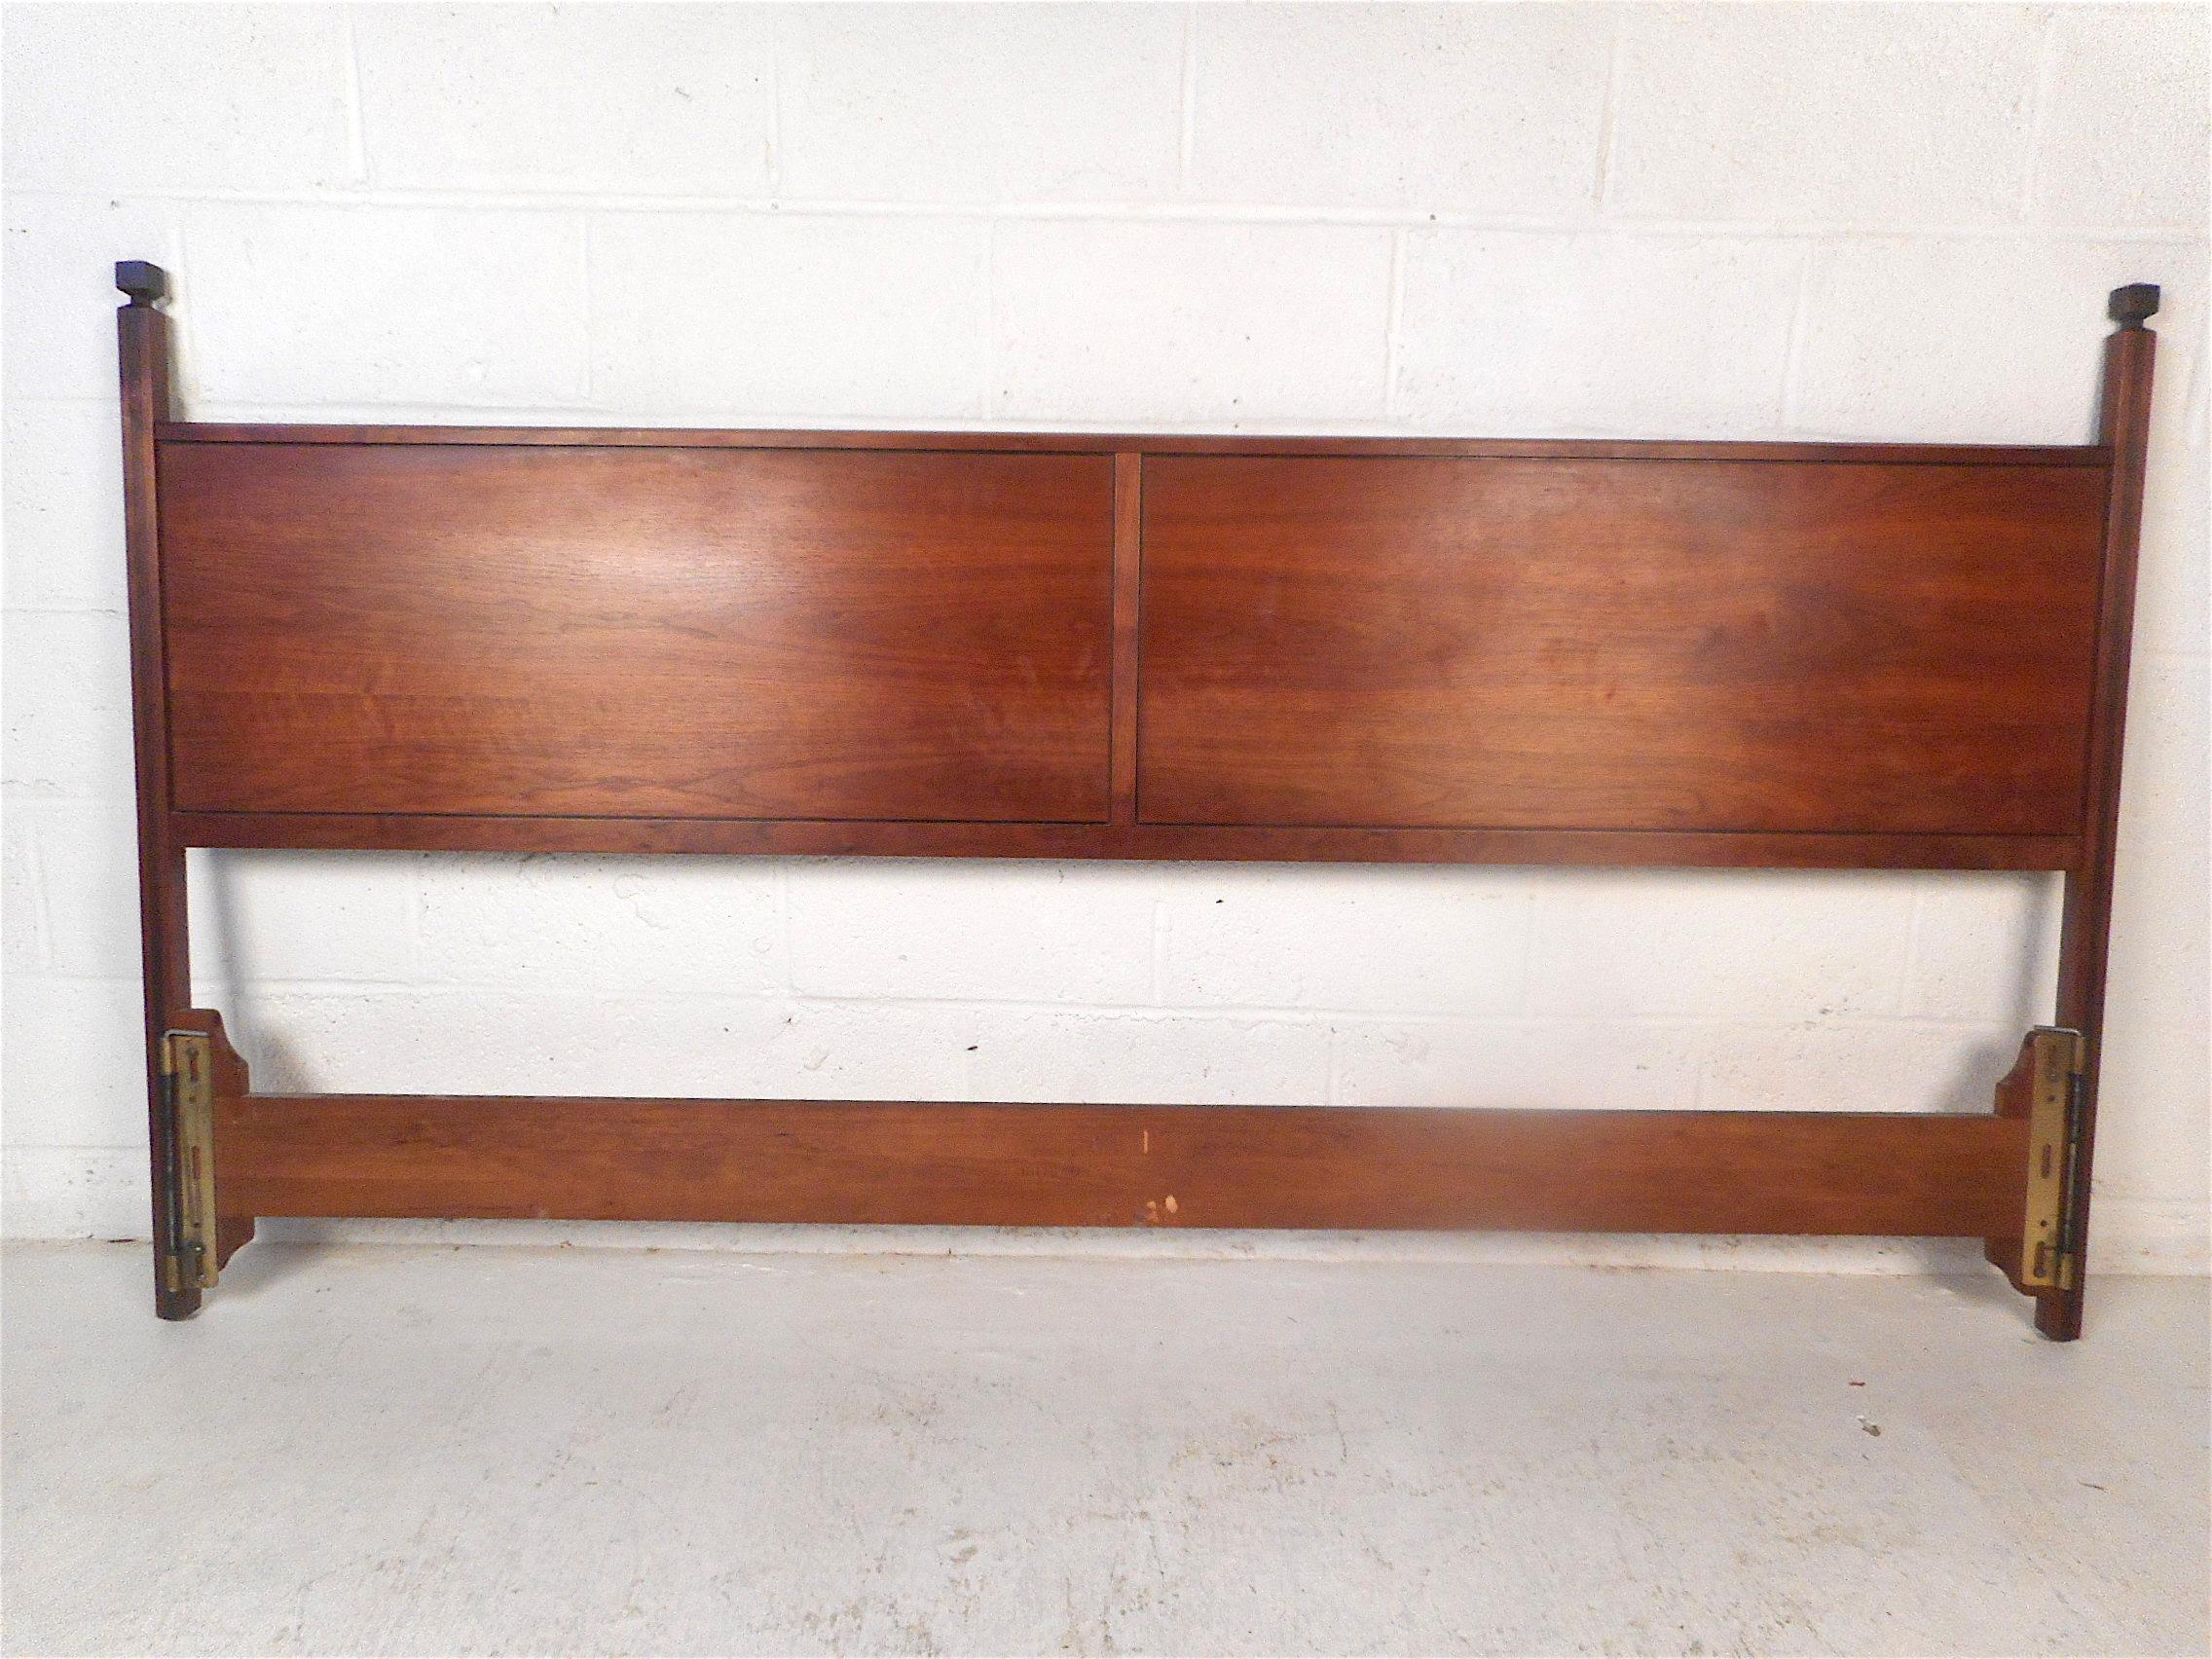 Stylish midcentury headboard. Two large panels with sleek woodgrain compose the board's body, with supports on either end featuring ornamental toppers and inlaid accents. Attributed to Paul McCobb. This headboard is sure to impress in any modern